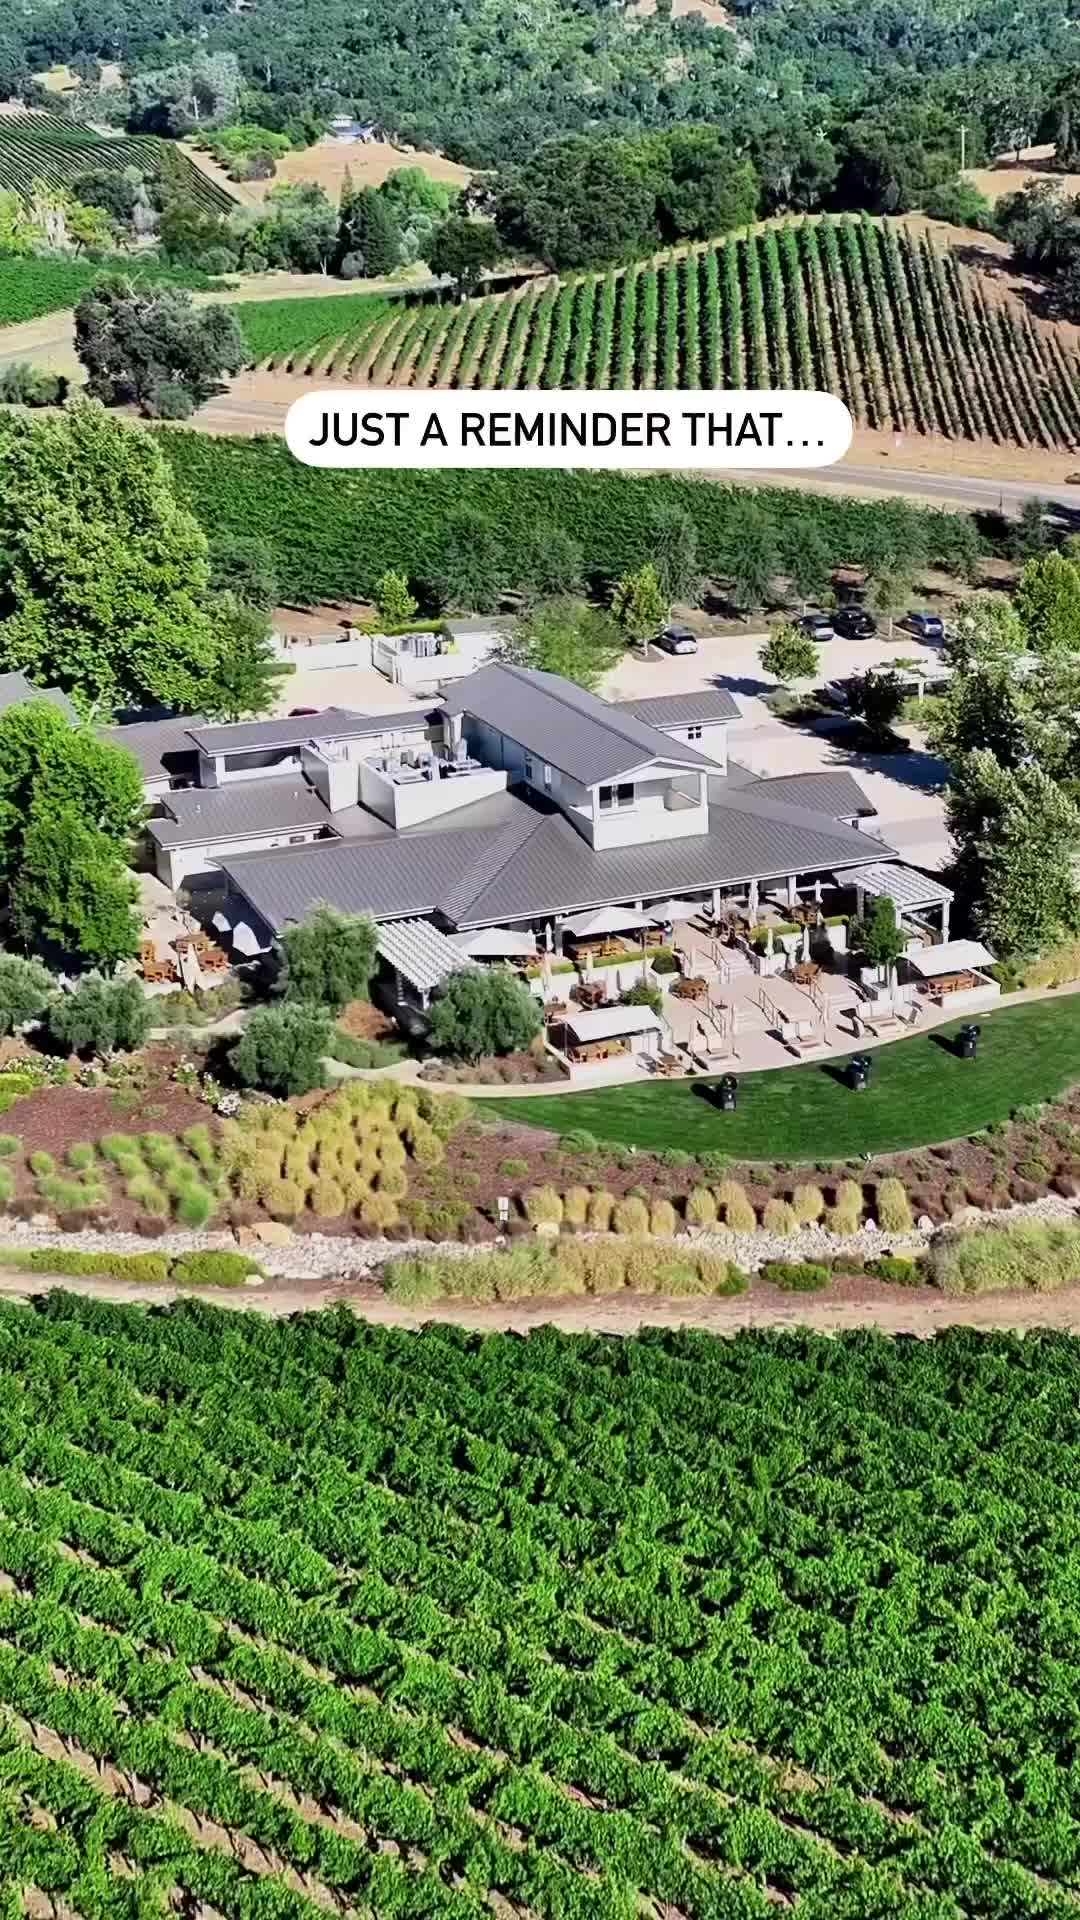 Justin Vineyards and Winery is one of the most beautiful places in the Central Coast 🍇🍷

Have you been here yet?

From the beautiful vineyard views, the wine tasting , premium wines, the Michelin green star restaurant experience and even an Inn where you can spend a beautiful weekend - Justin truly has it all! 🍷

.
.
.
.
.
#justinwine #justinvineyards #centralcoast #california #winwcountry #winetasting #wine #winelover #winelovers #californiatravel #travel #travelinfluencer #influencer what do do in wine country Paso Robles california